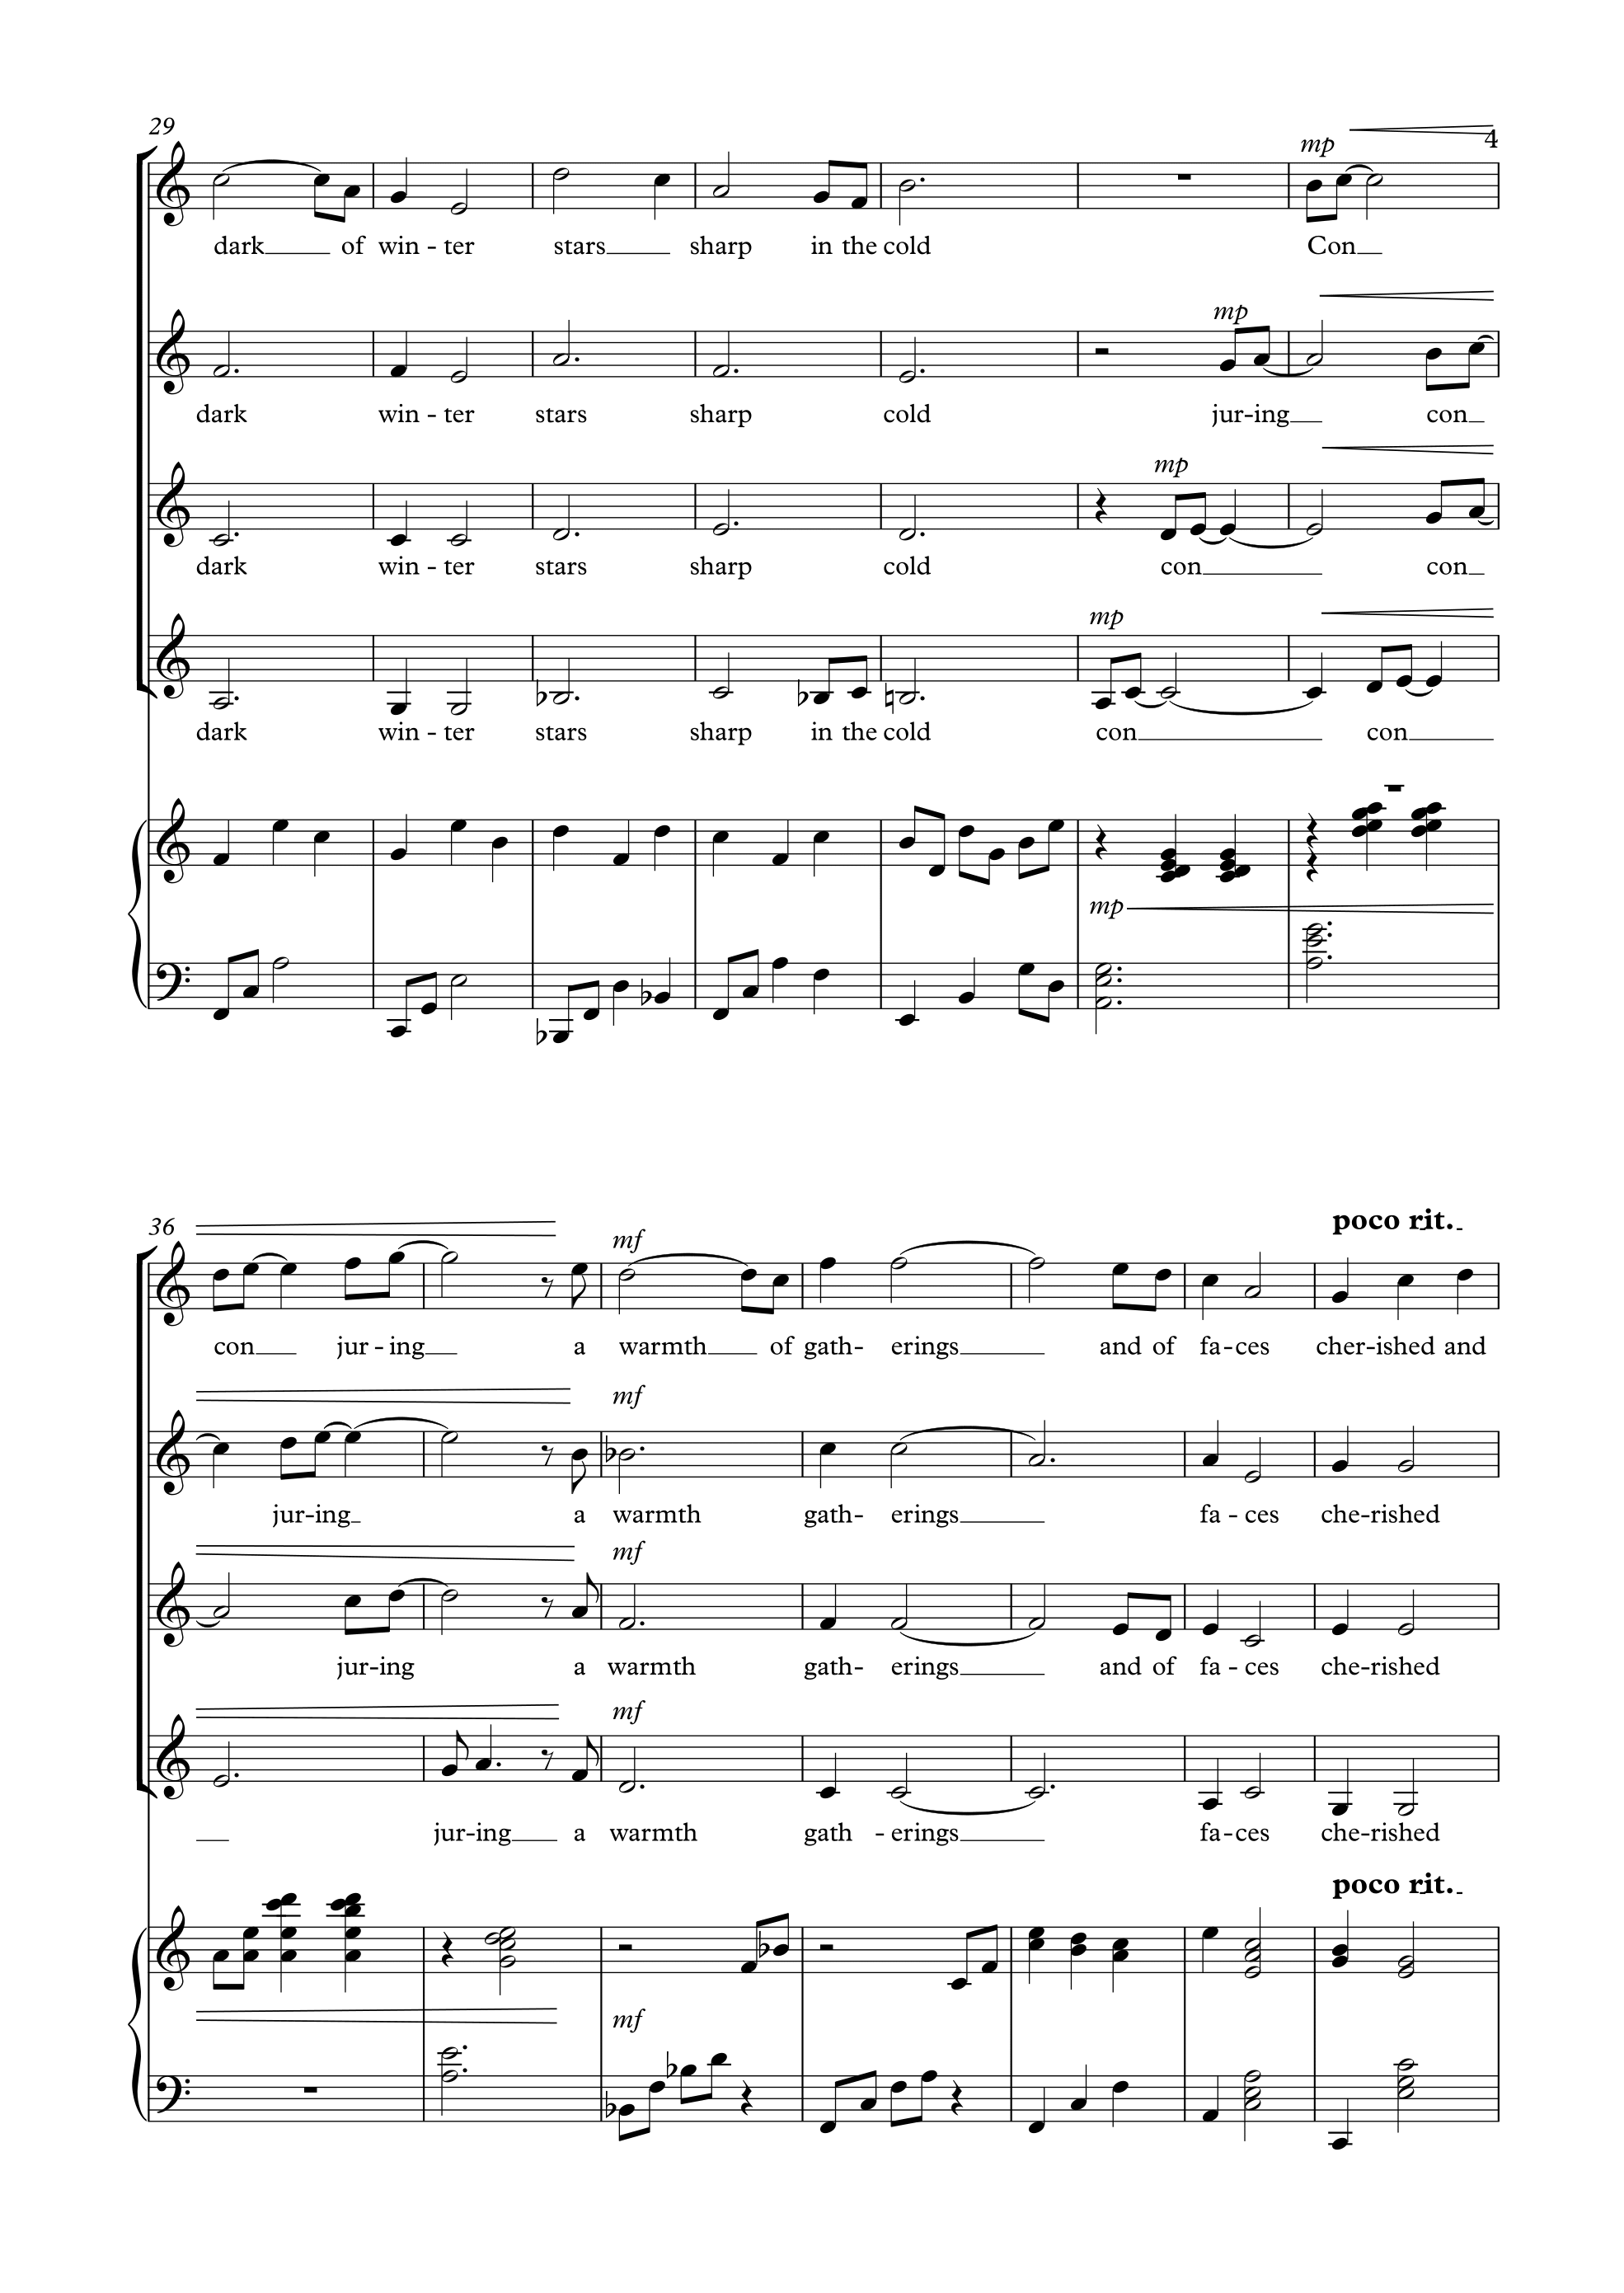 201902_A Promise of Spring Full Score-5.png